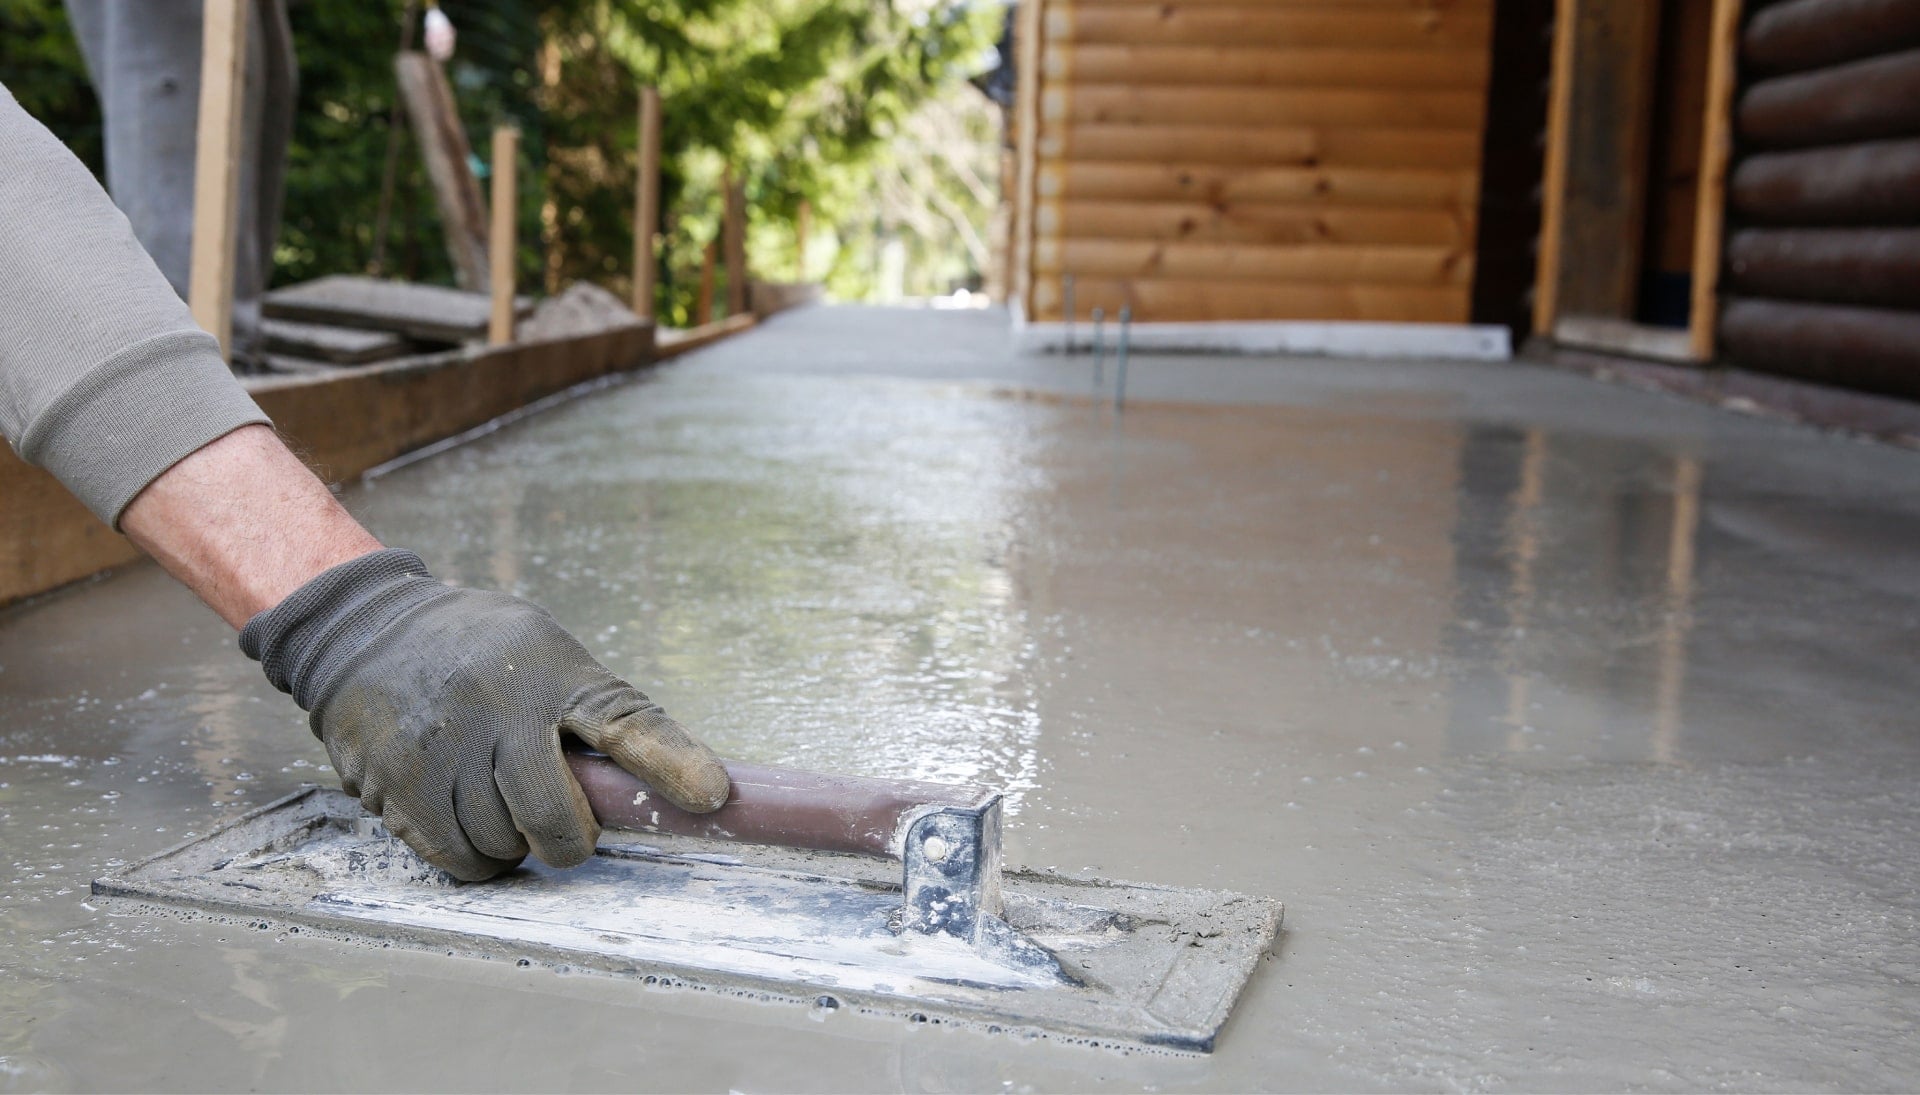 Smooth and Level Your Floors with Precision Concrete Floor Leveling Services in Racine, WI - Eliminate Uneven Surfaces, Tripping Hazards, and Costly Damages with State-of-the-Art Equipment and Skilled Professionals.